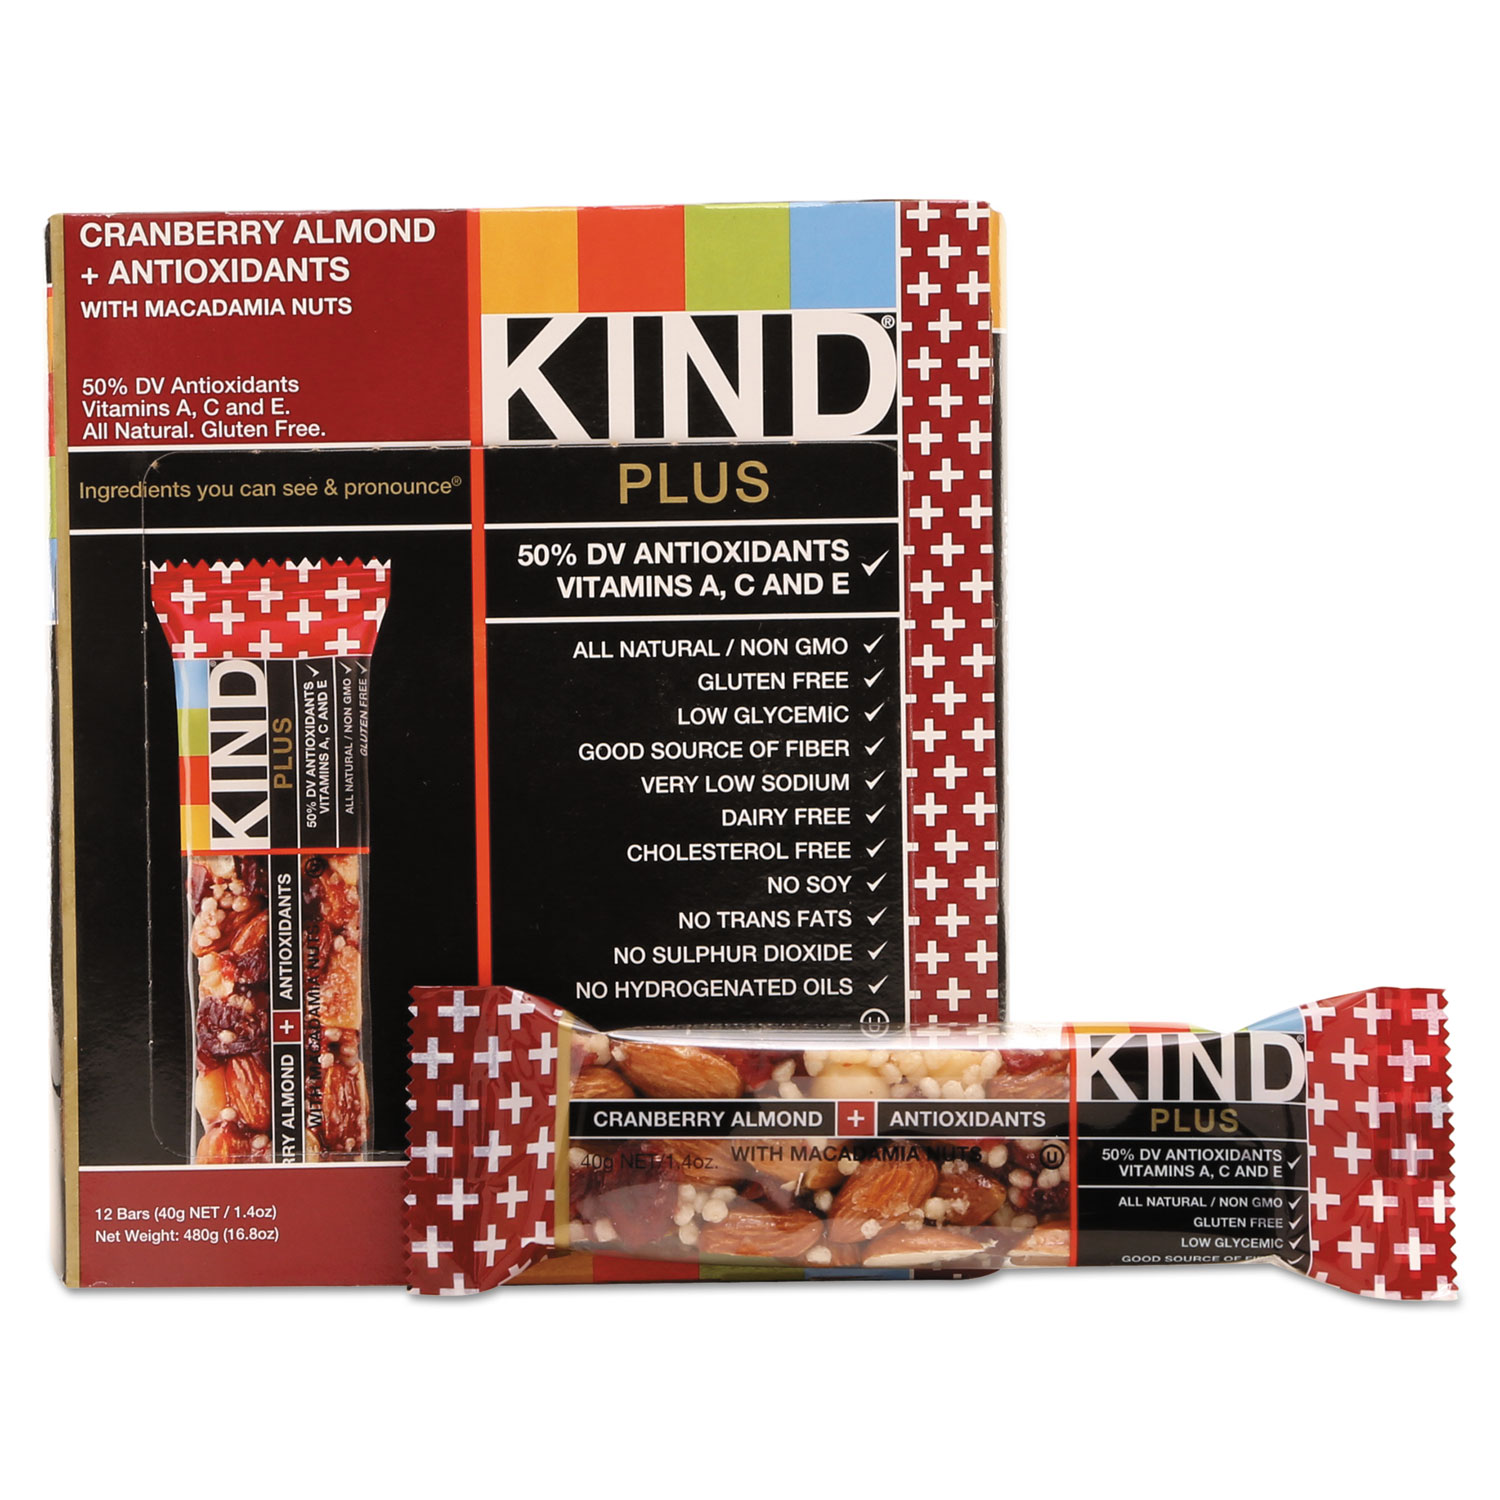  KIND 17211 Plus Nutrition Boost Bar, Cranberry Almond and Antioxidants, 1.4 oz, 12/Box (KND17211) 